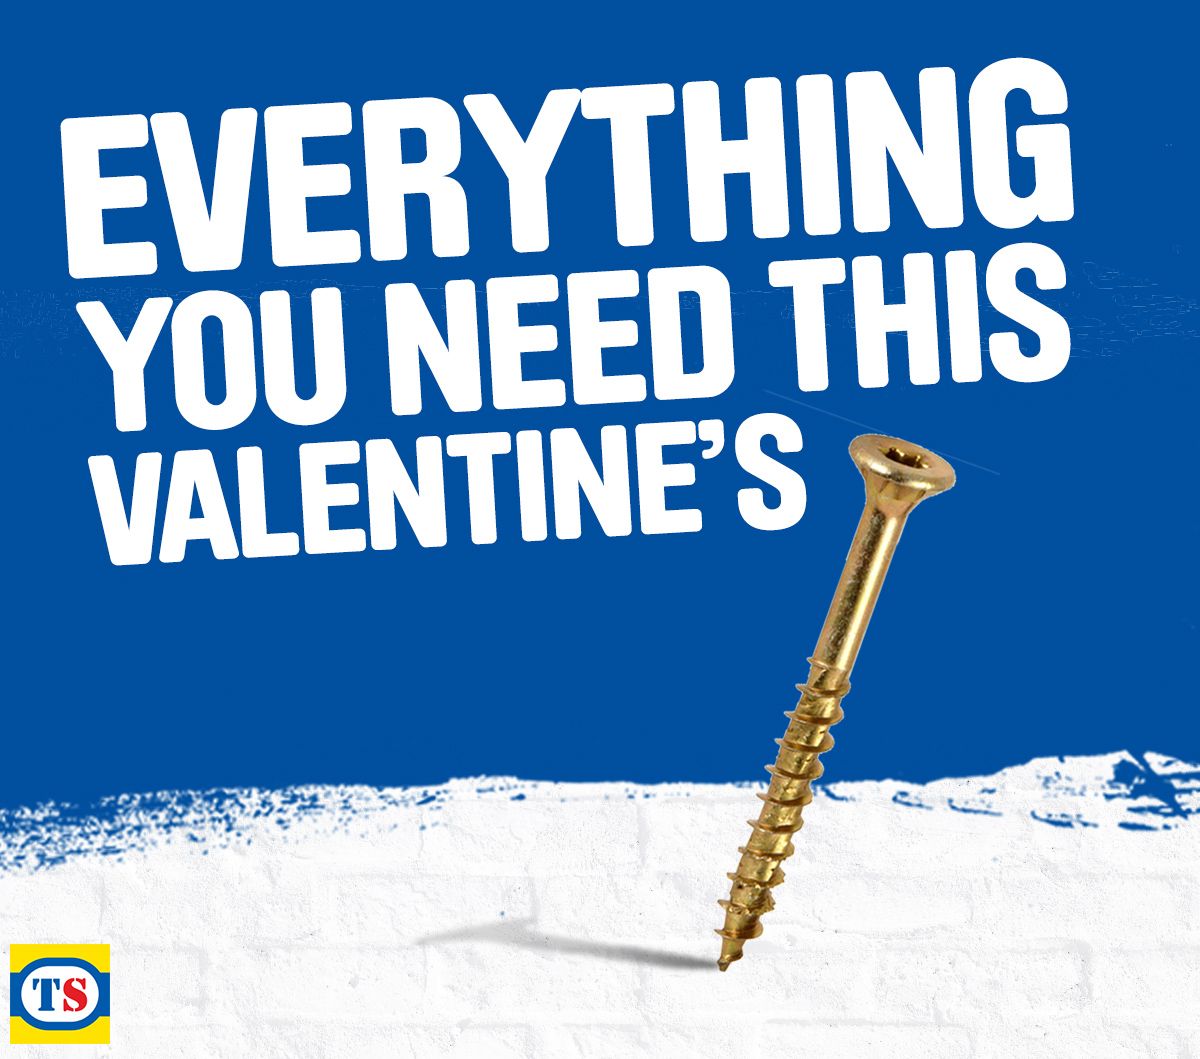 Everything you need this Valentine's